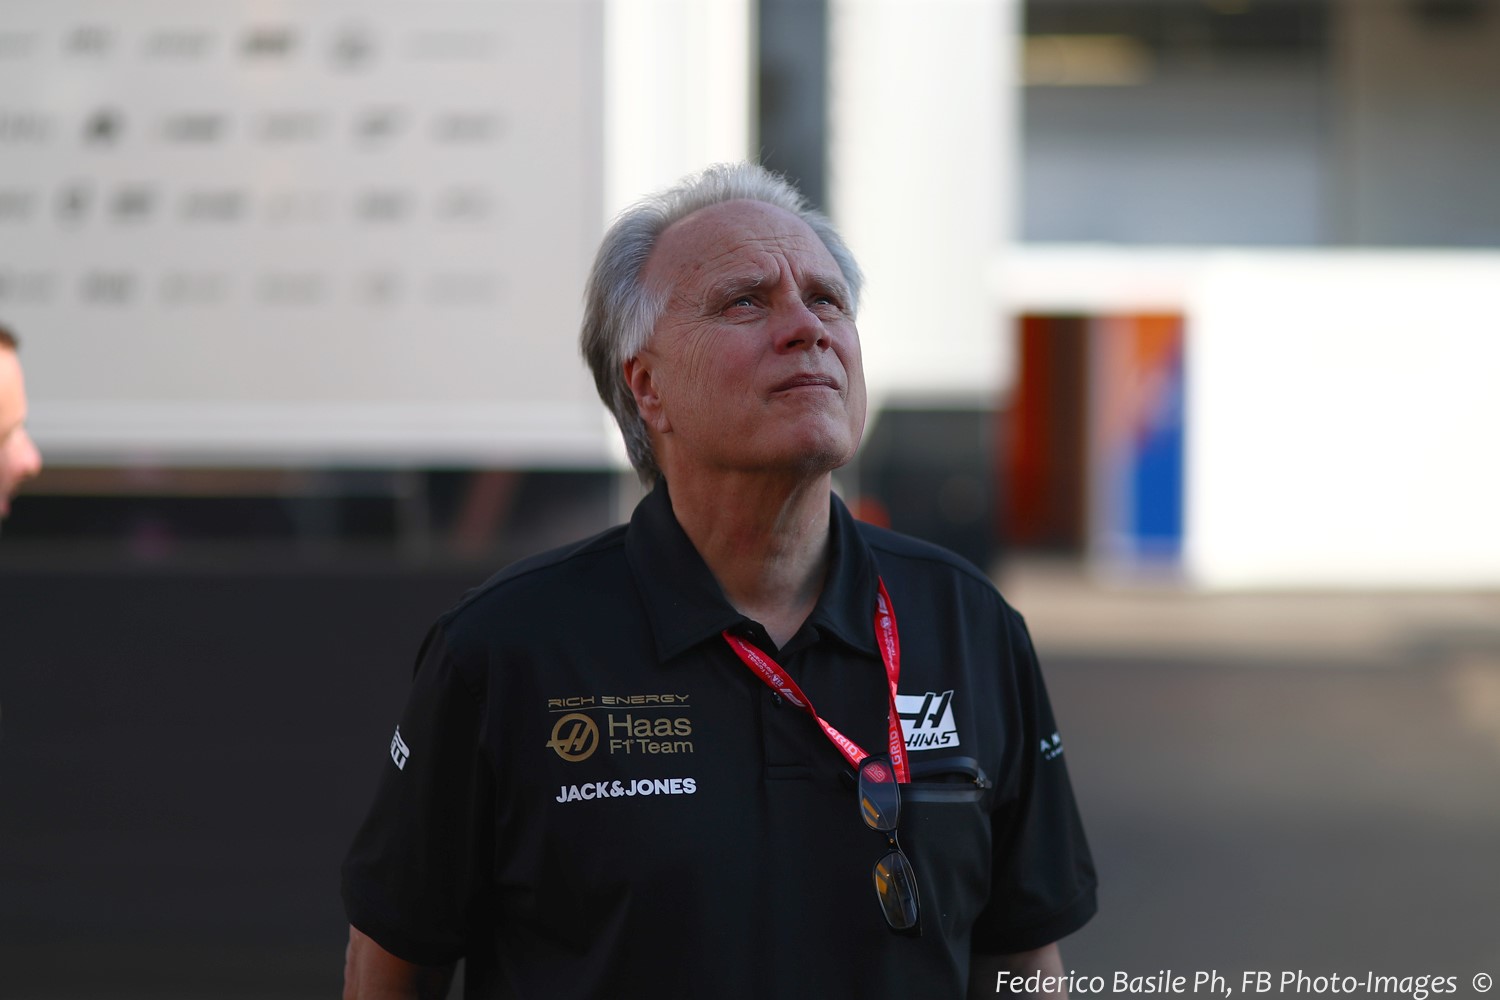 Will Gene Haas pull his hapless F1 team out of the sport when it's time to sign the 2021 agreements?